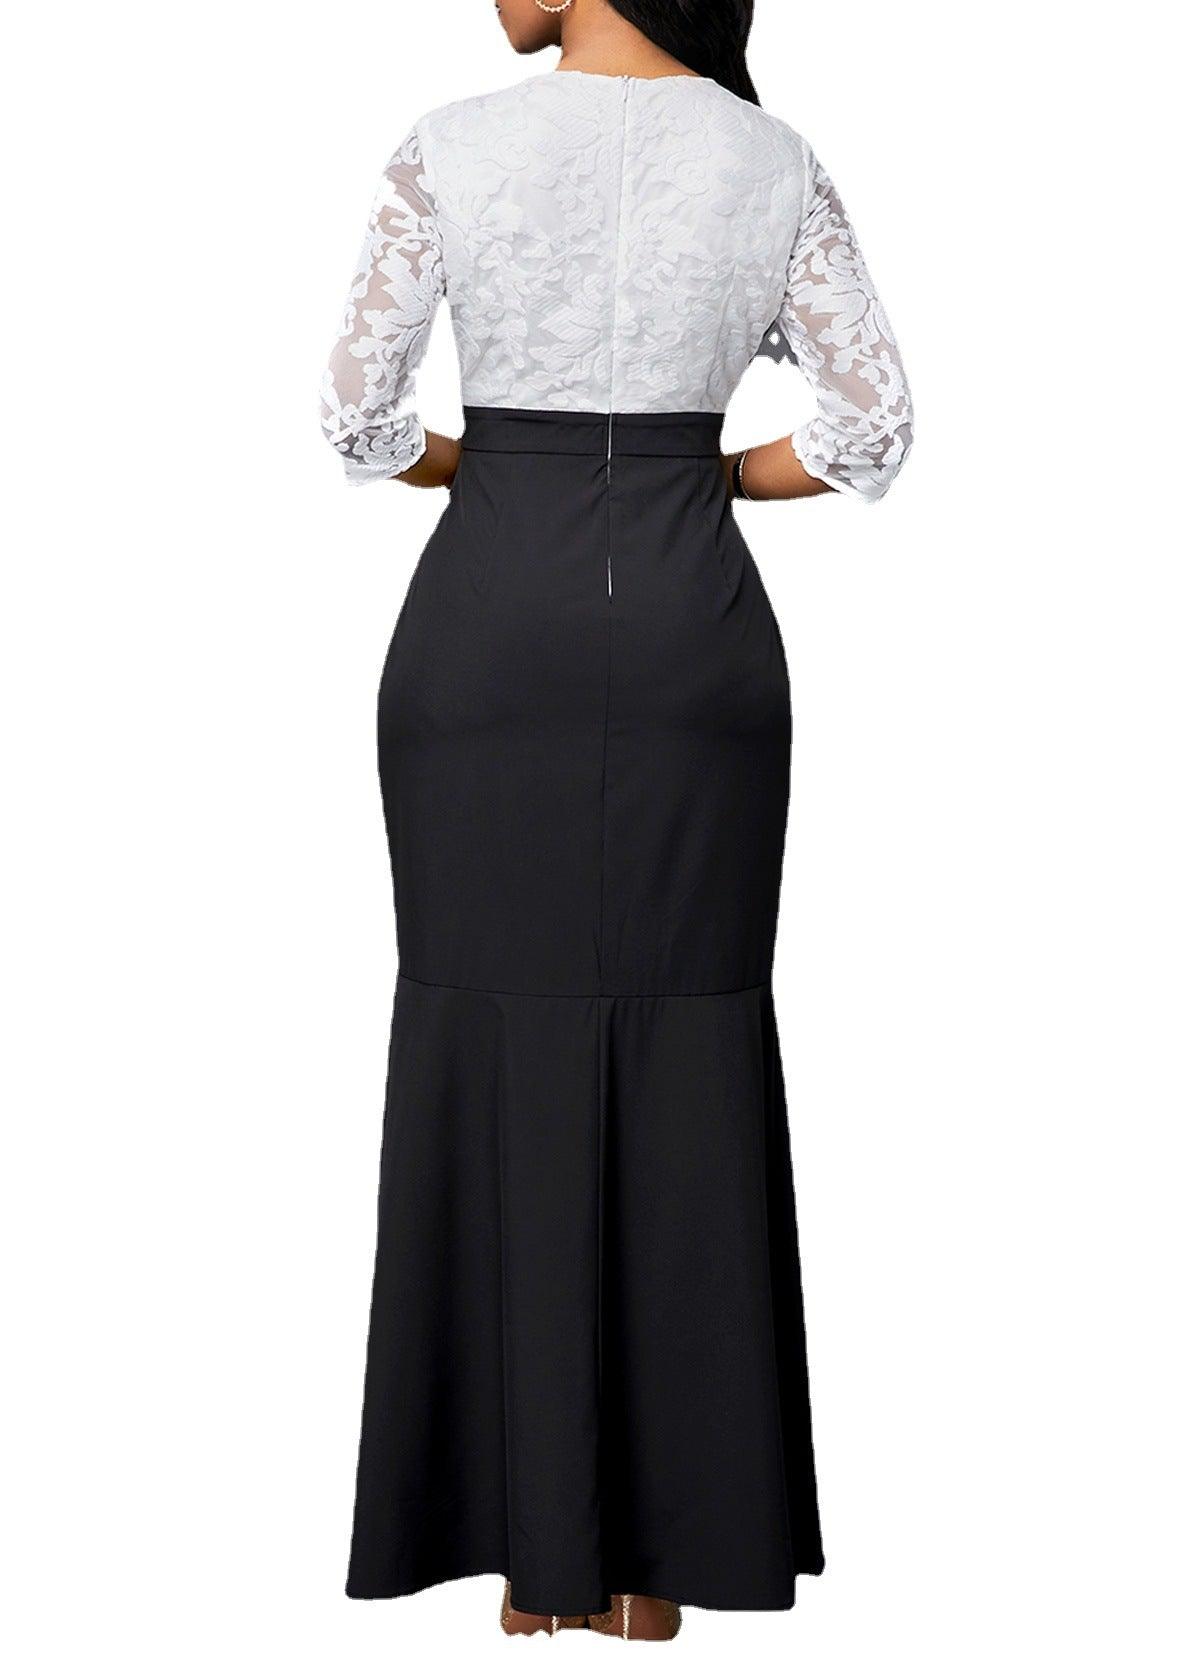 Fashion Lace Black And White Patchwork Slim Bag Buttock Dress Women